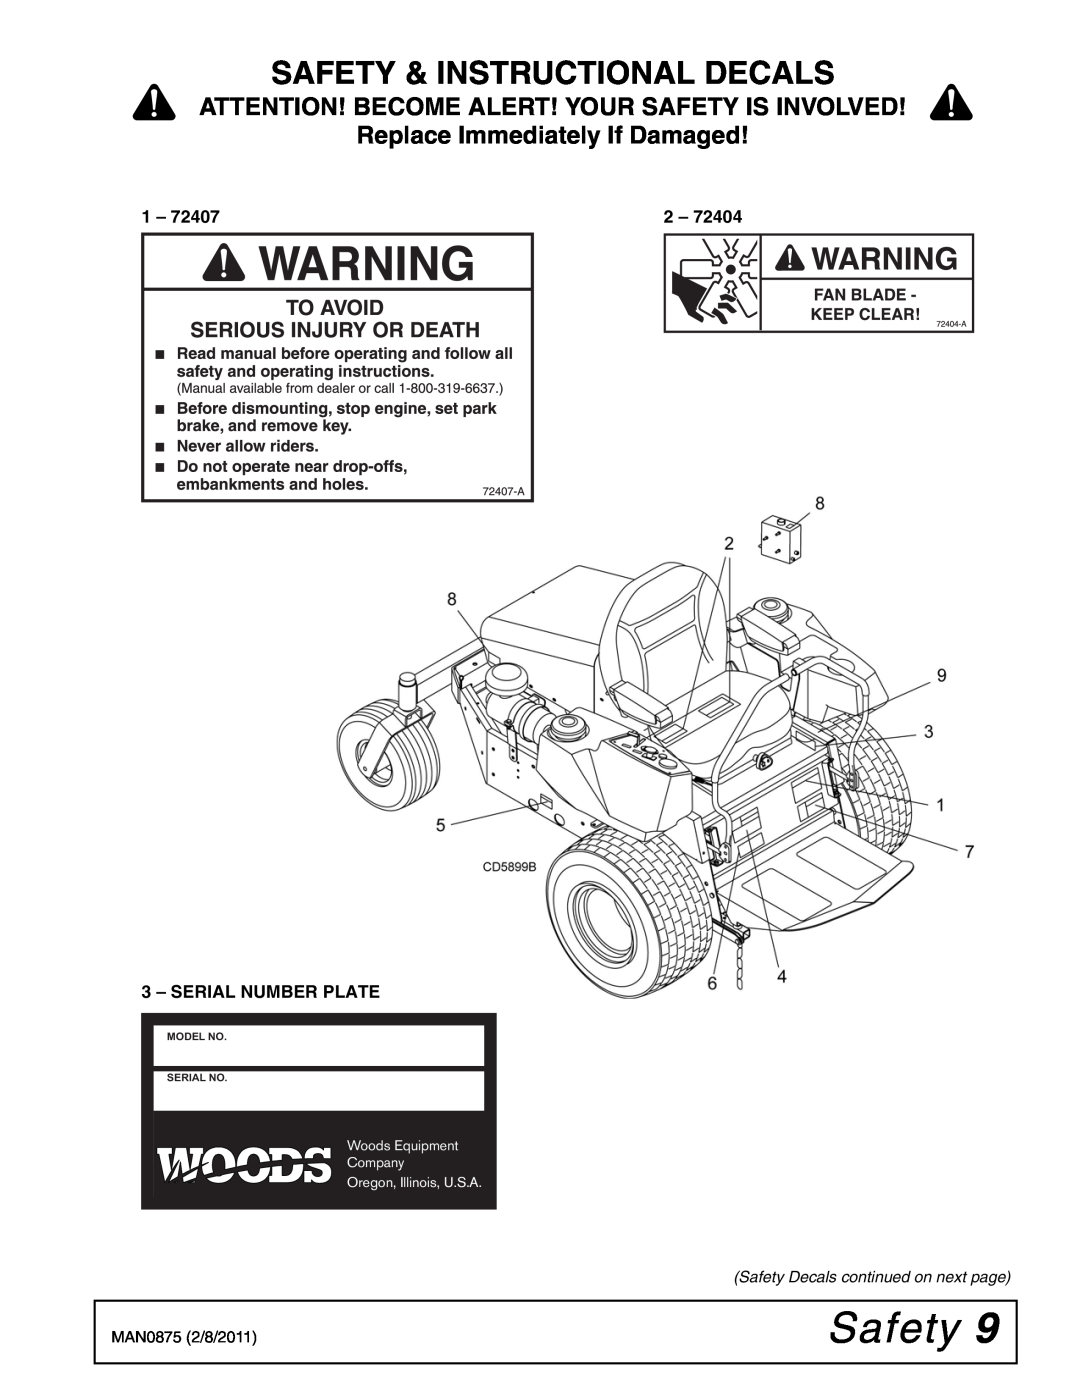 Woods Equipment FZ23B Safety & Instructional Decals, Replace Immediately If Damaged, Safety Decals continued on next page 